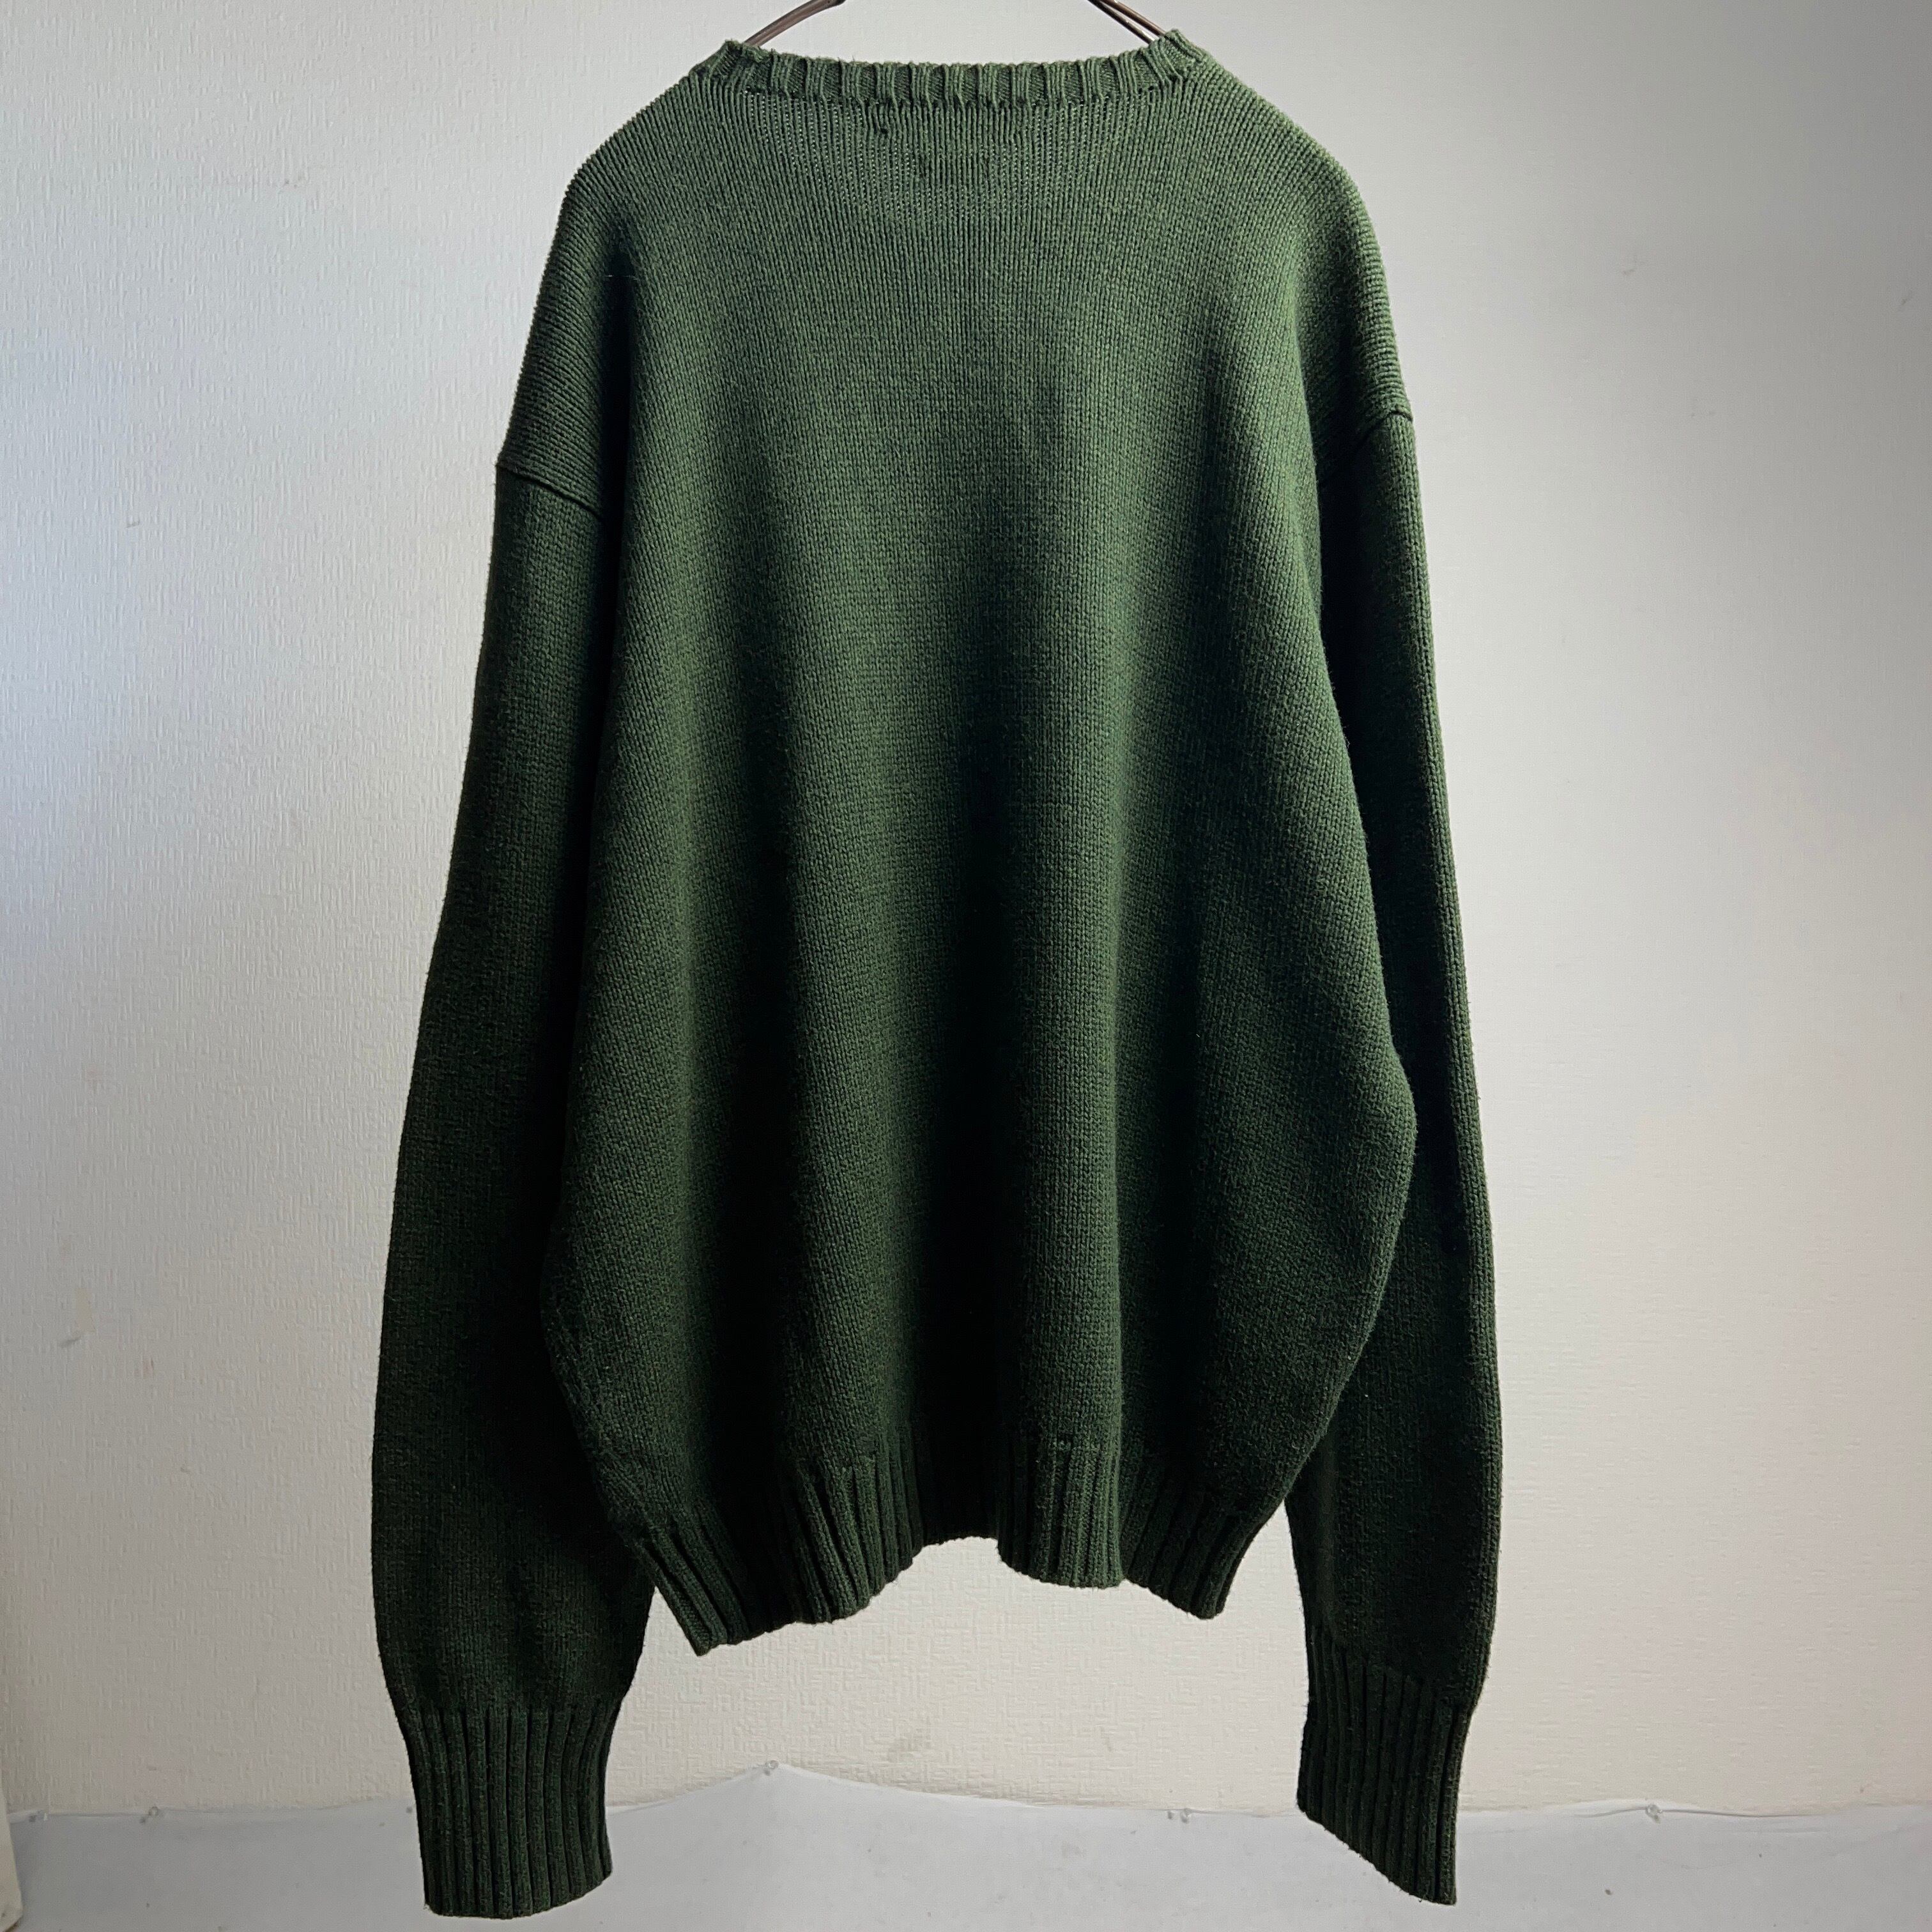 “Polo by Ralph Lauren” Cotton Knit Sweater SIZE XL ポロラルフローレン ポニーロゴ刺繍  ニットセーター モスグリーン【1000A268】